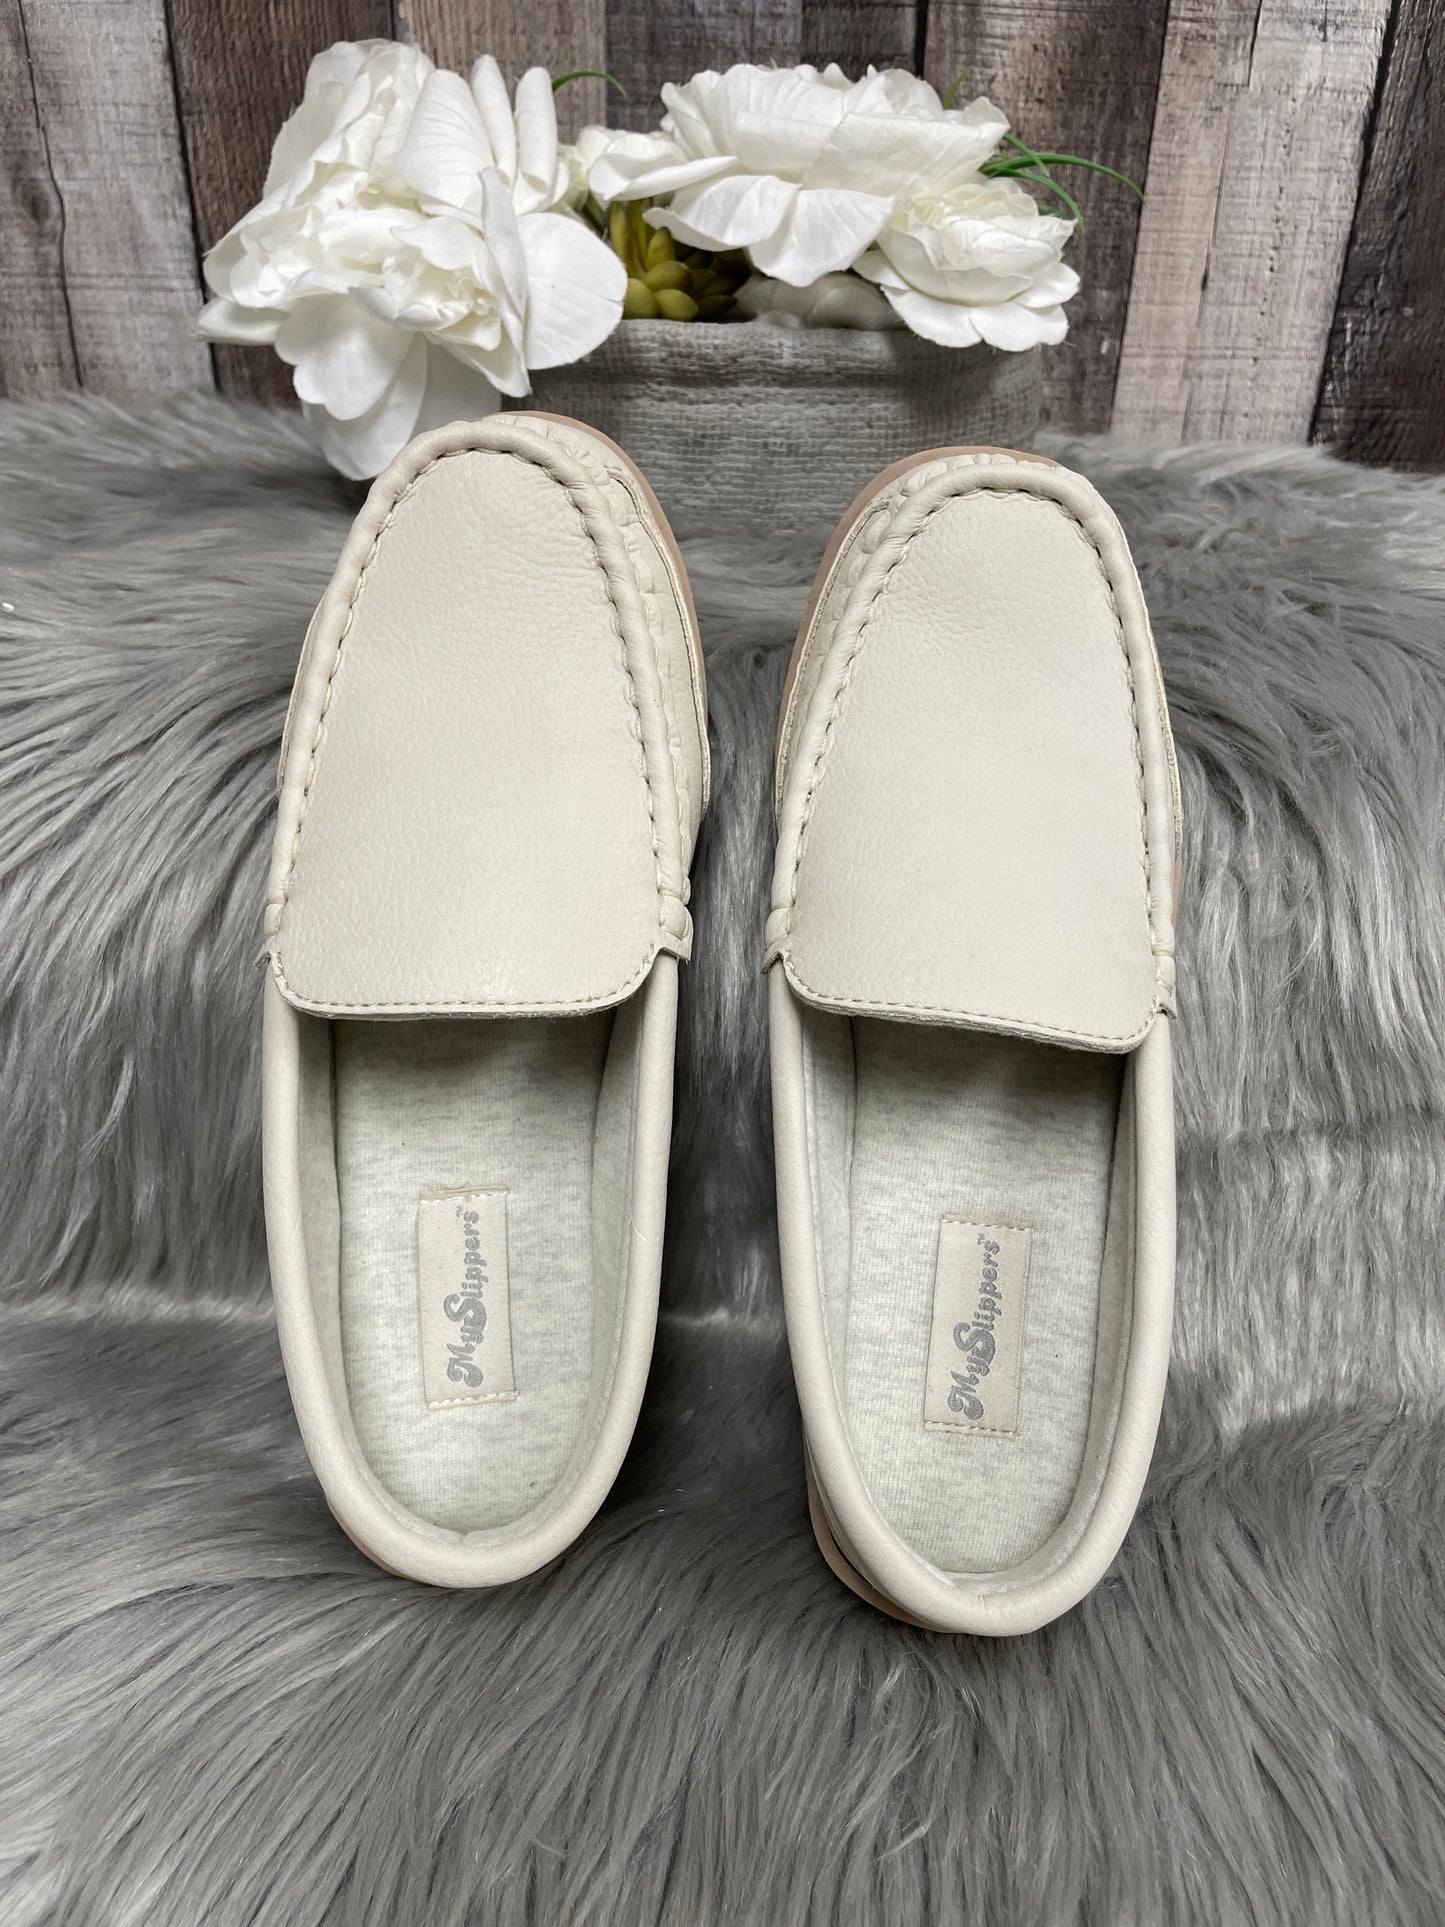 Slippers By Cme  Size: 7